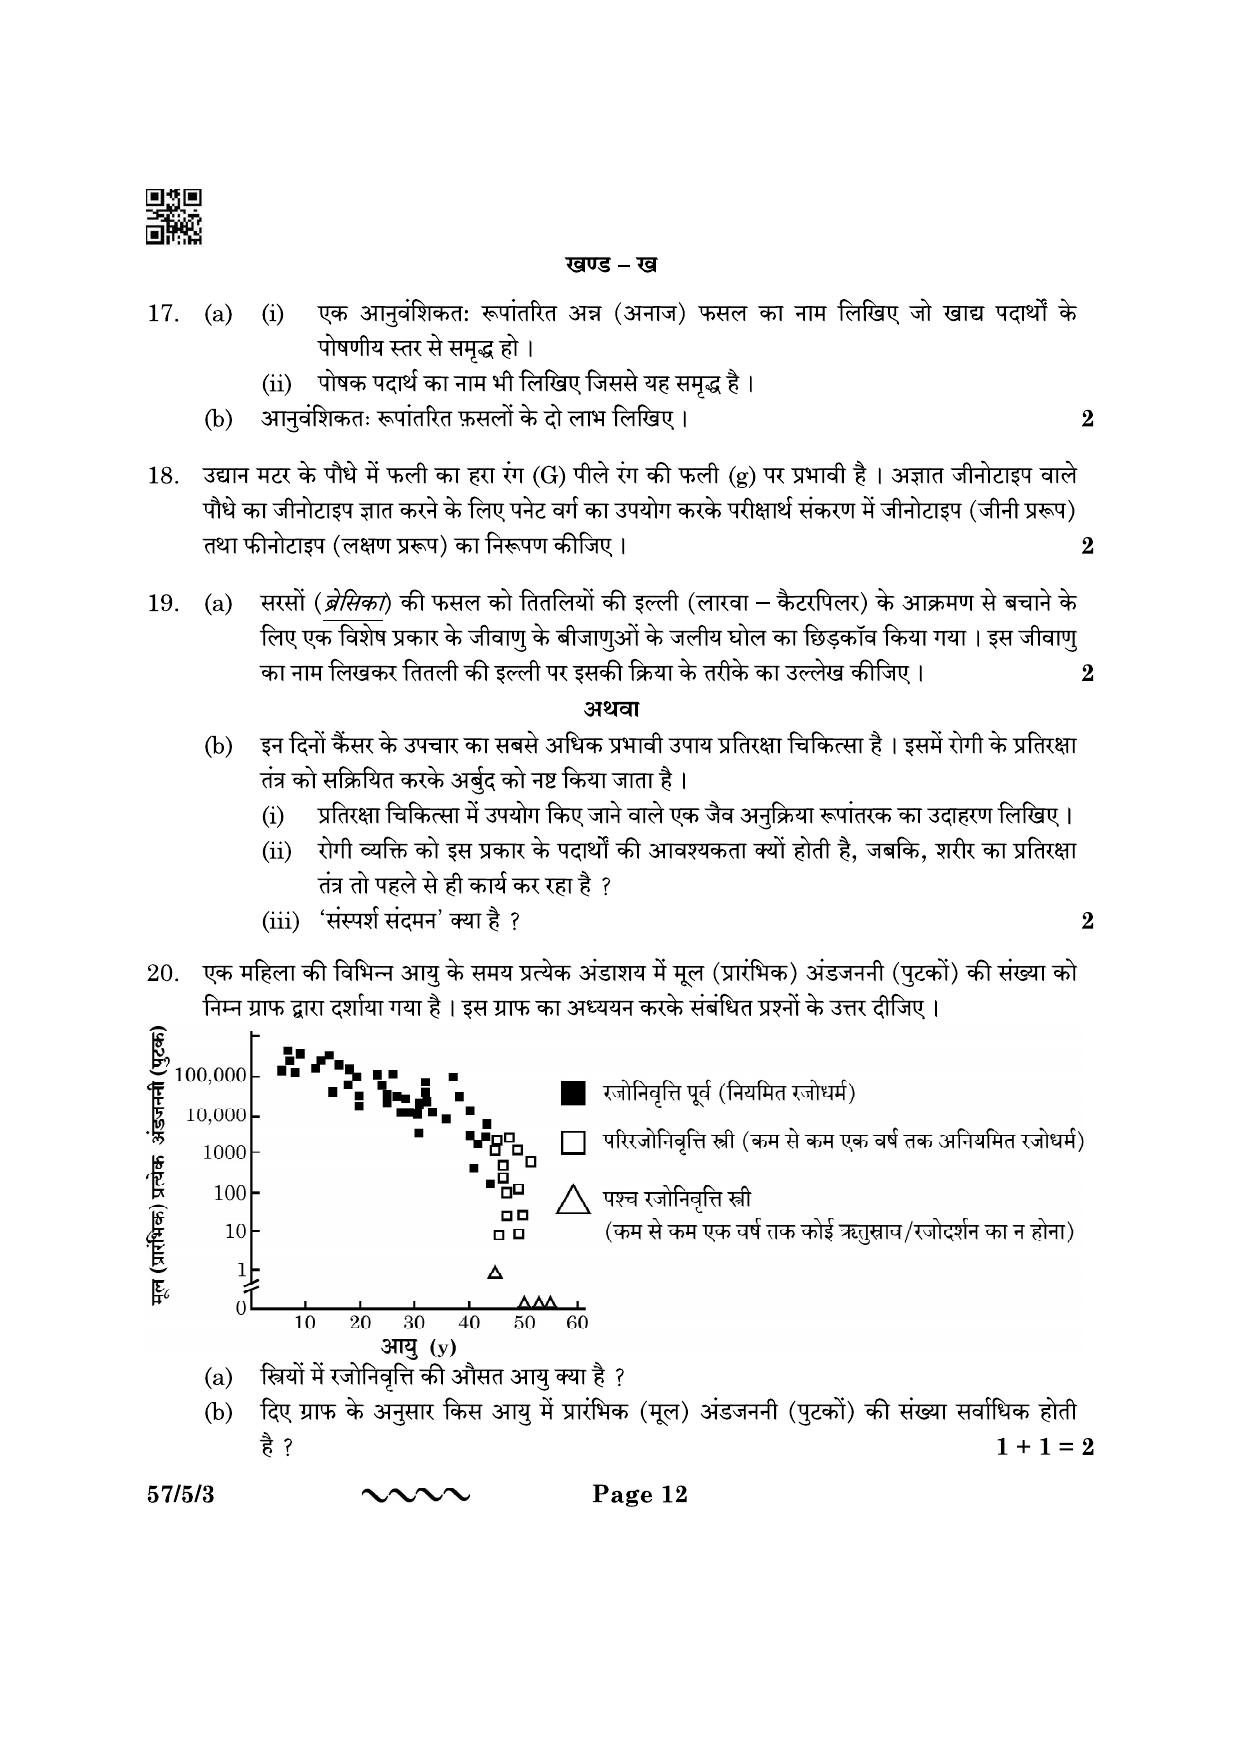 CBSE Class 12 57-5-3 Biology 2023 Question Paper - Page 12